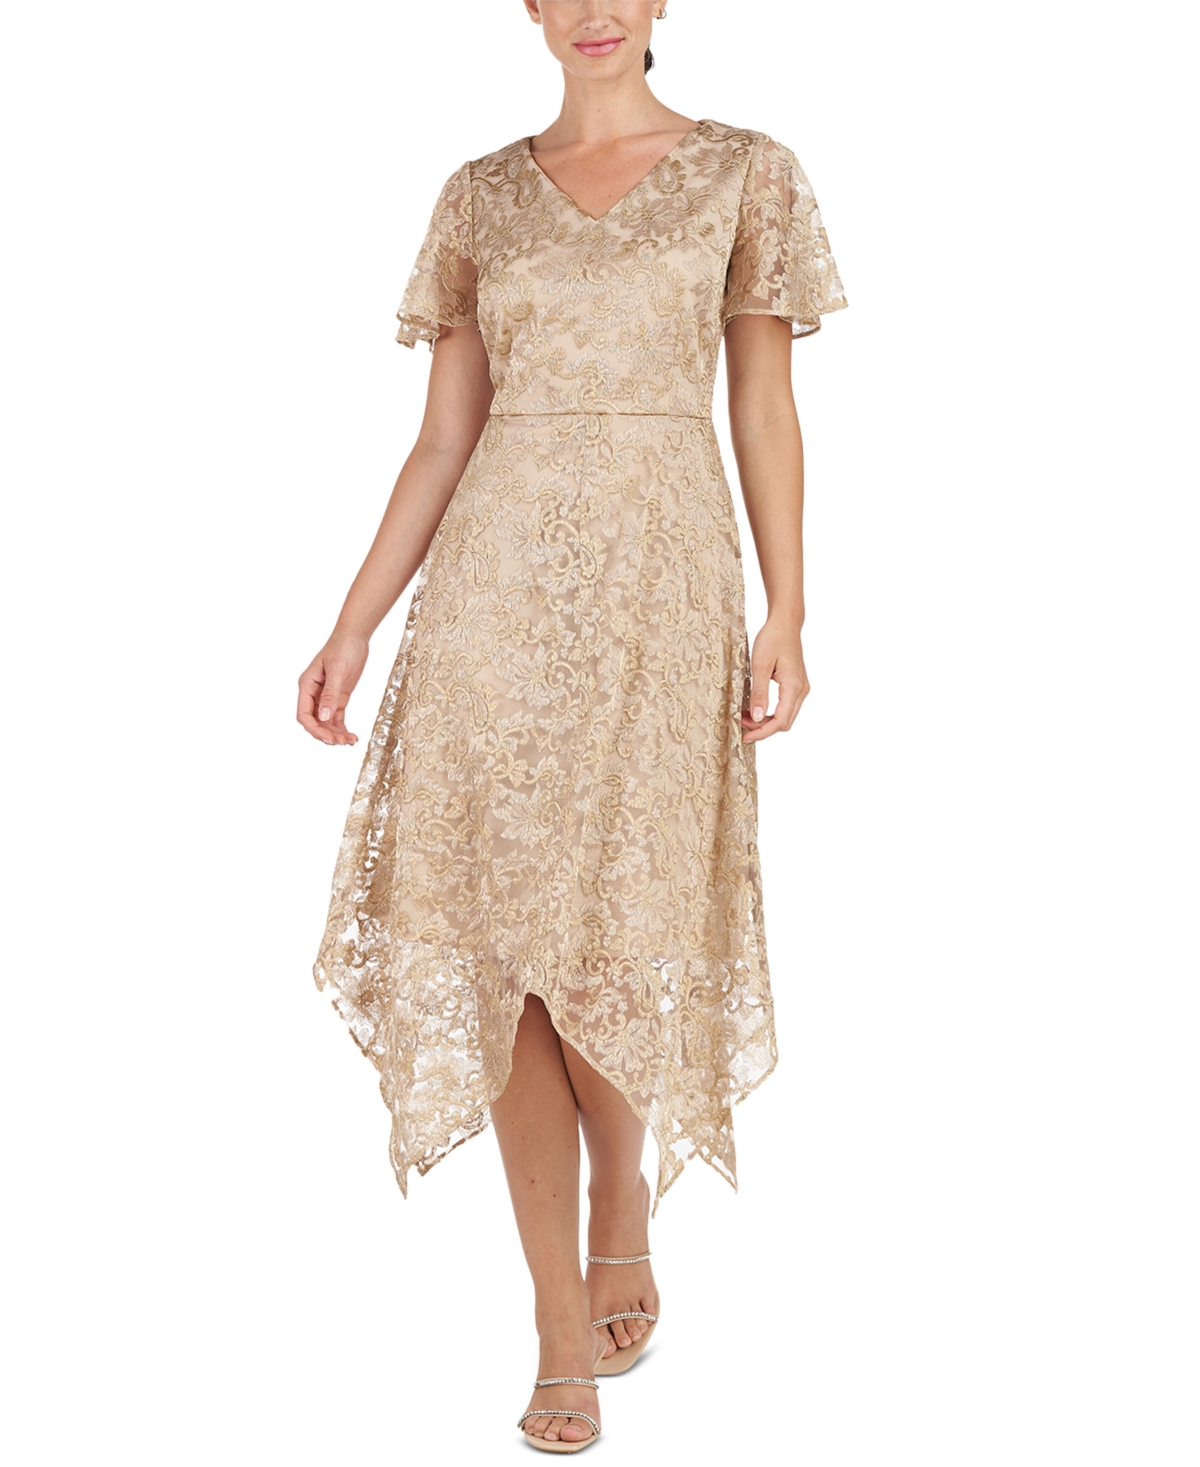 1920s Style Dresses, 1920s Dress Fashions You Will Love Js Collections Womens Emerson Embroidered Dress - Gold $123.99 AT vintagedancer.com